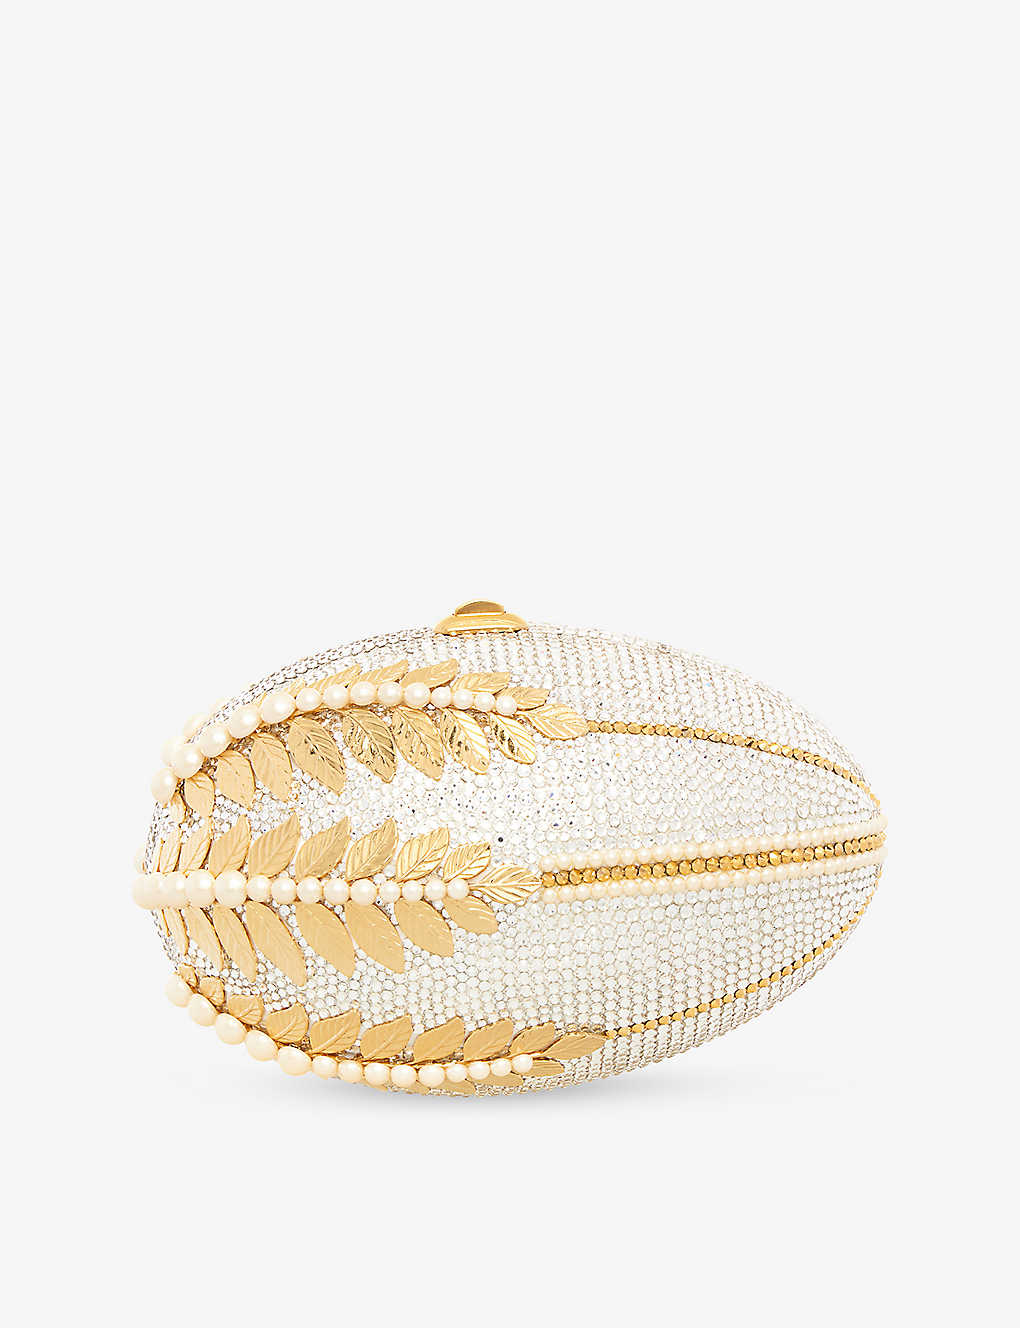 Judith Leiber Couture Womens Champagne Limited-edition 1960s Egg Empire Metal Clutch Bag